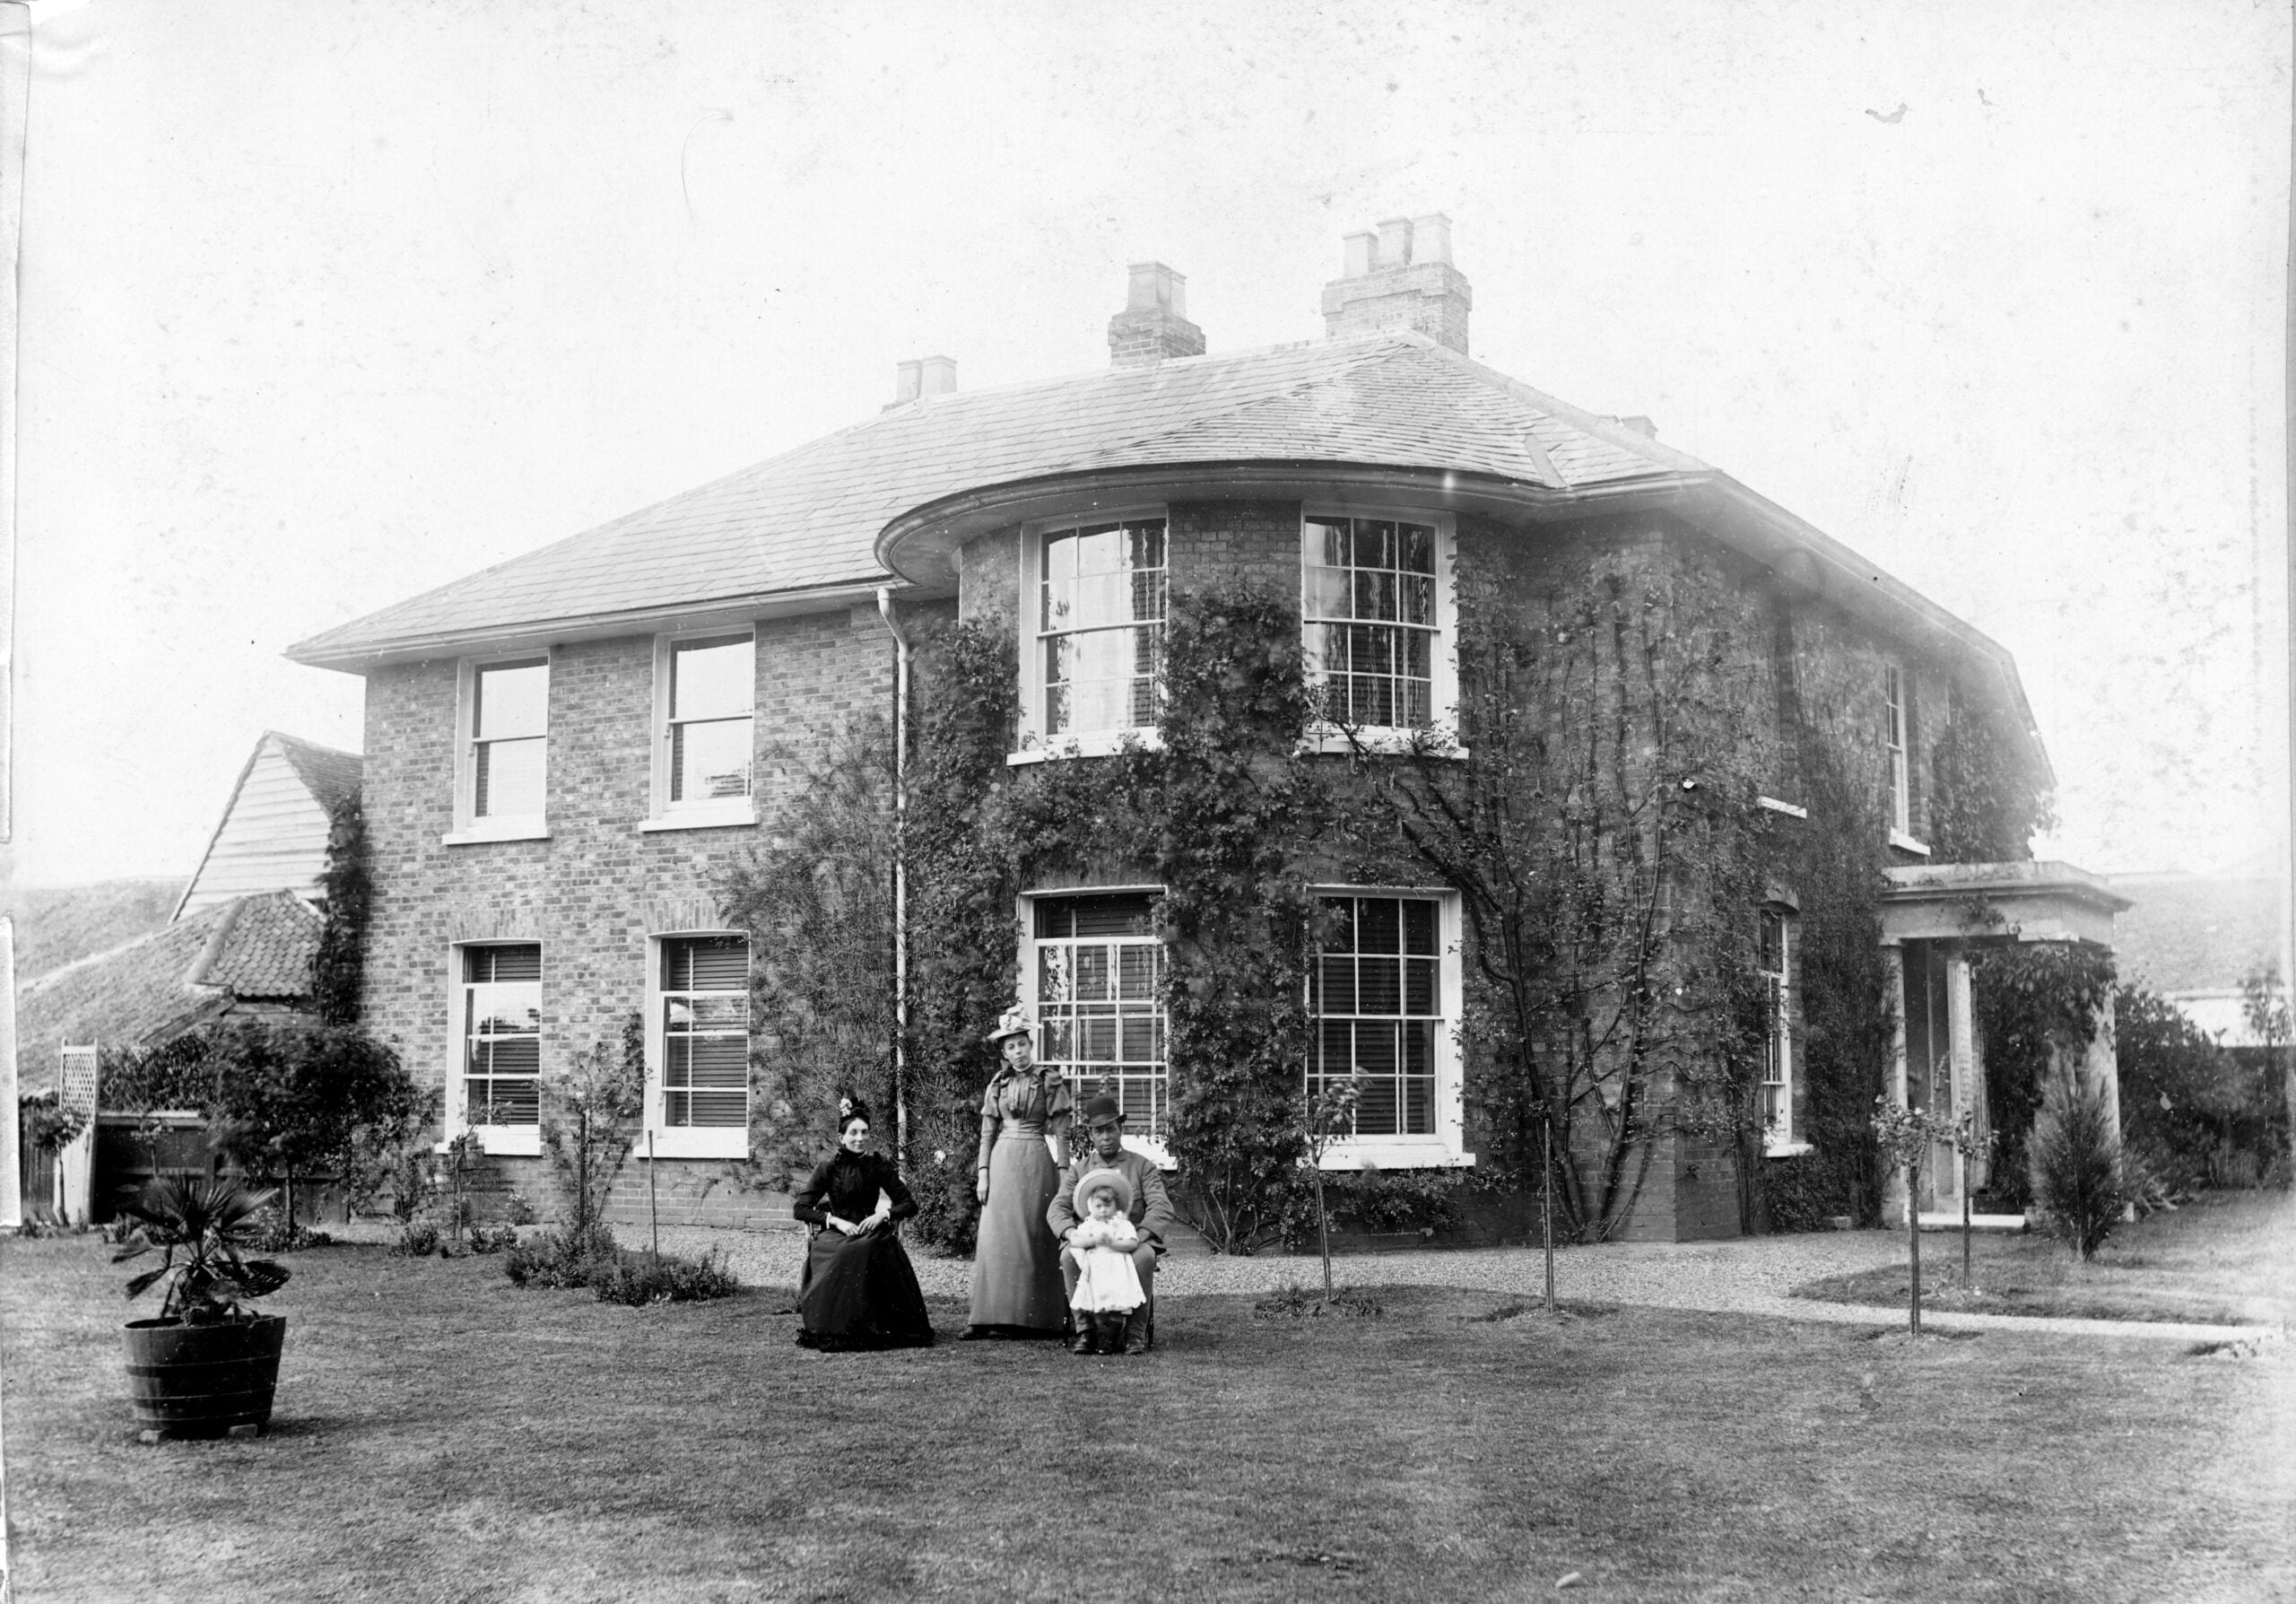 A group of four people posing for the camera on the lawn outside a large house in 1890s Neasden. One woman is seated slightly apart from the other three. The other woman stands next to a man who is seated in a chair with a small child on his lap.